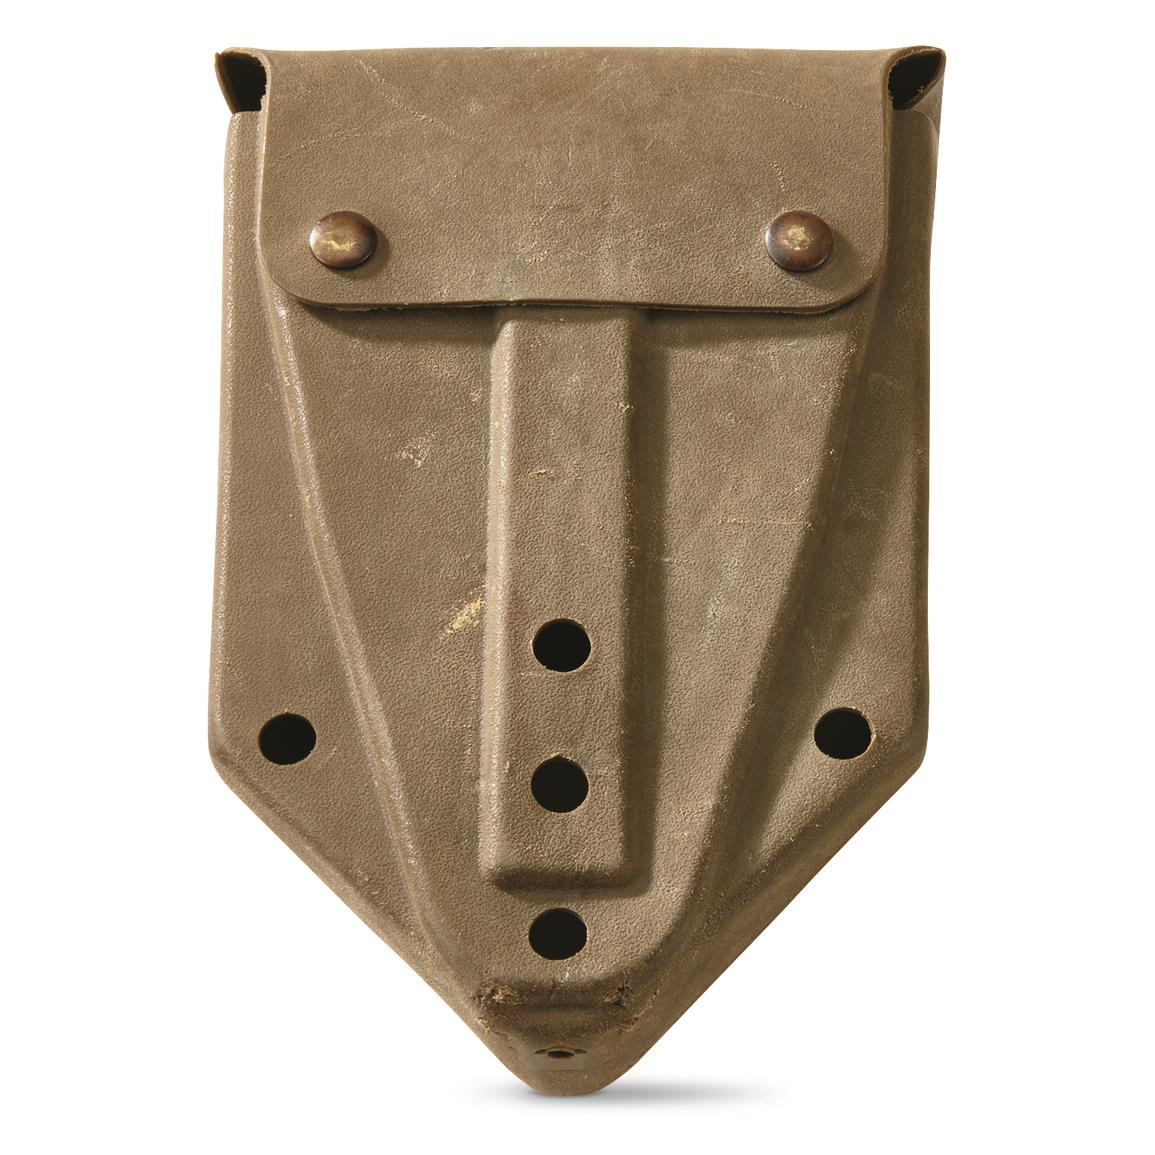 U.S. Military Surplus Entrenching Tool Cover, Used, Olive Drab